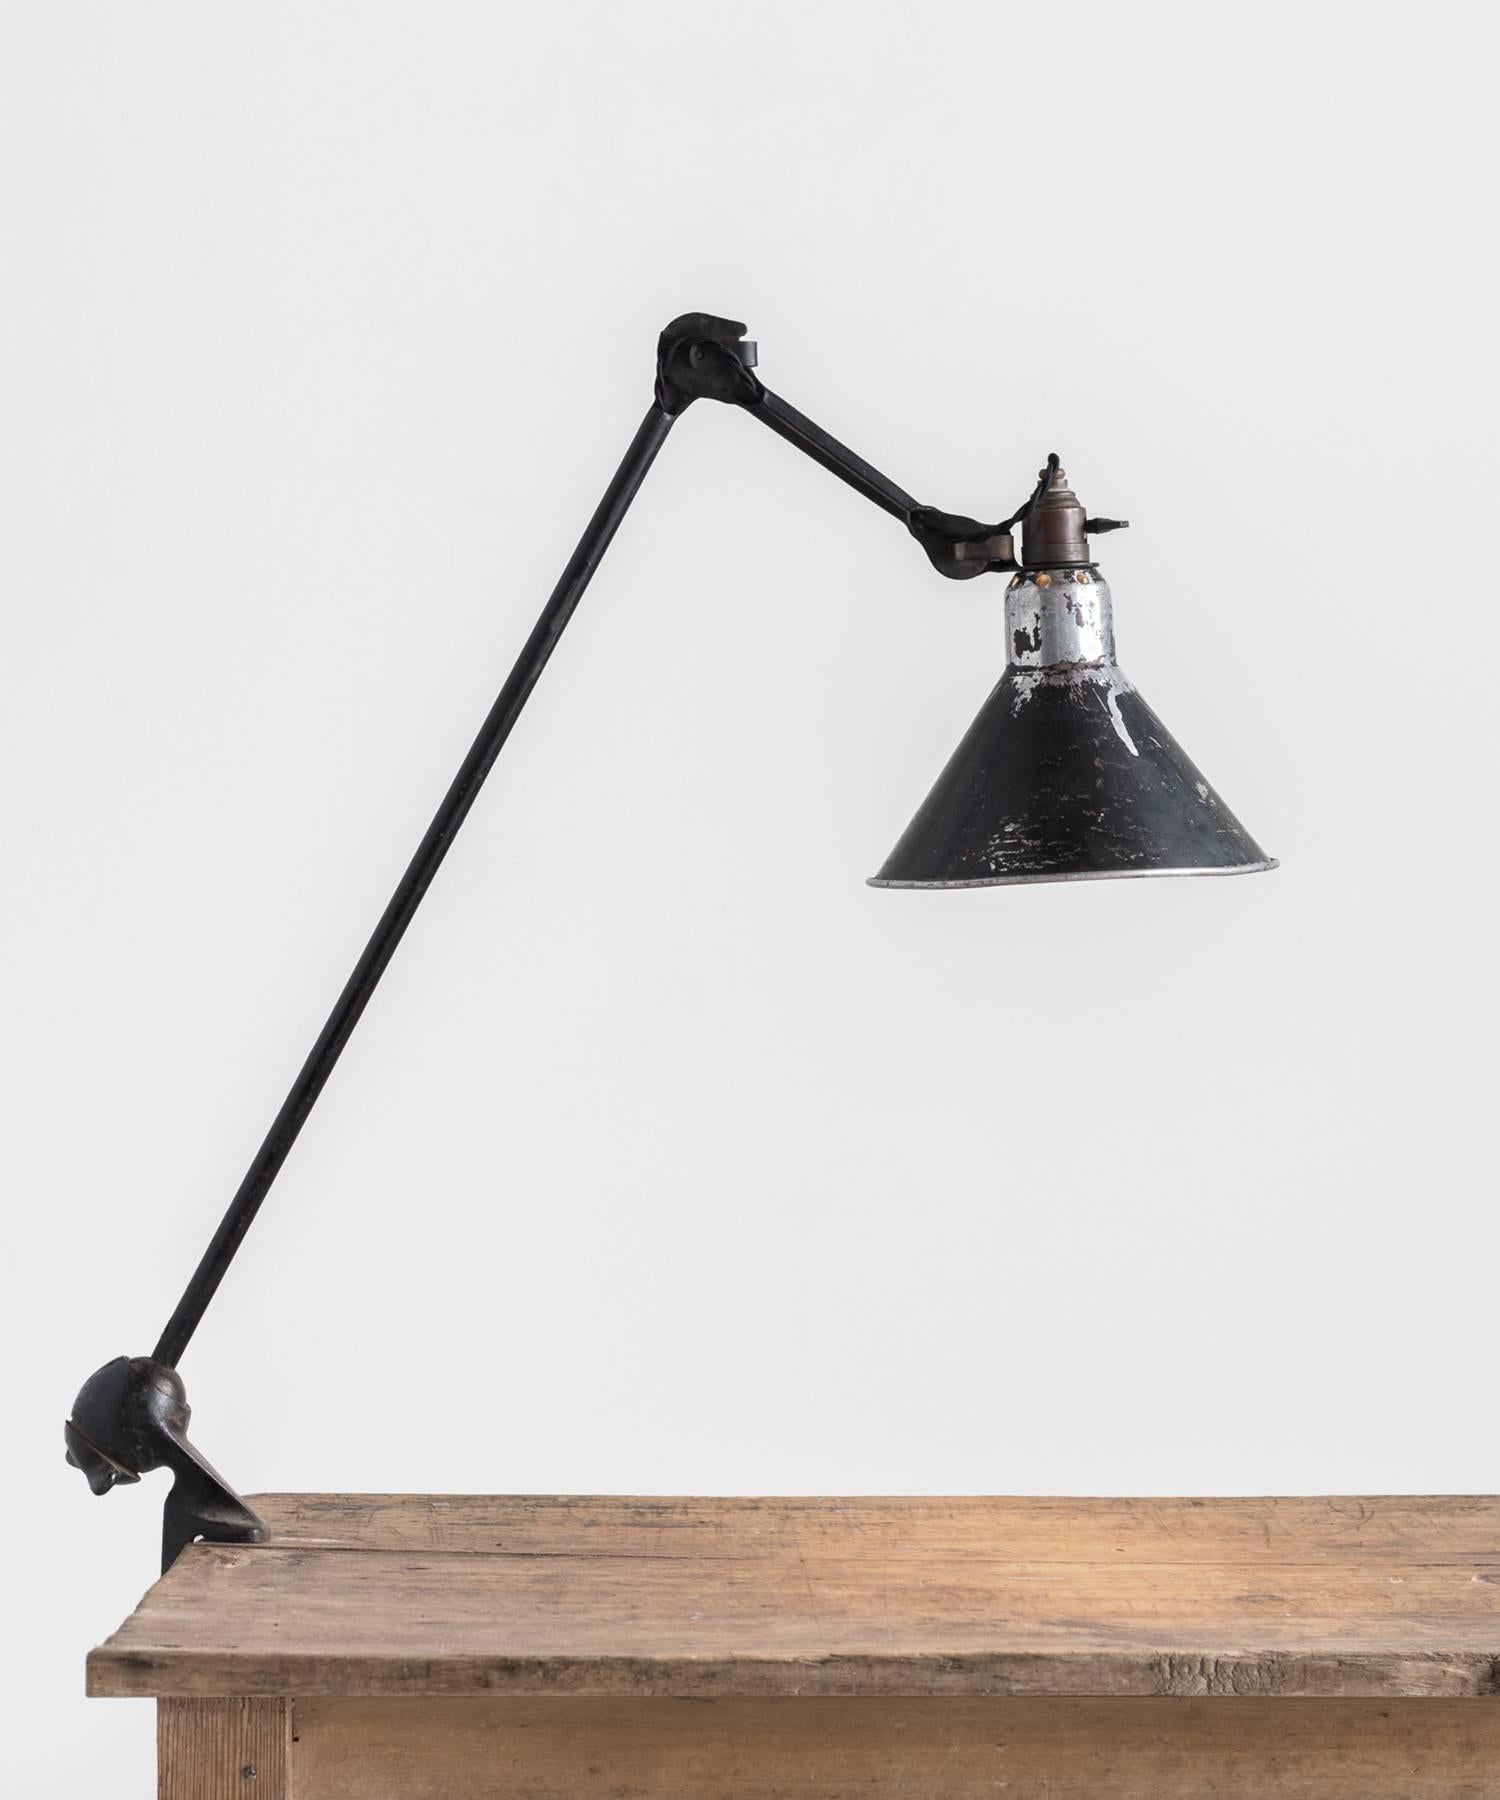 Gras Lamp No. 201, circa 1930

Industrial clamp-on desk lamp with amazing patina includes three points of adjustment, designed by Berard-Albin Gras. 

Measures: 8.25